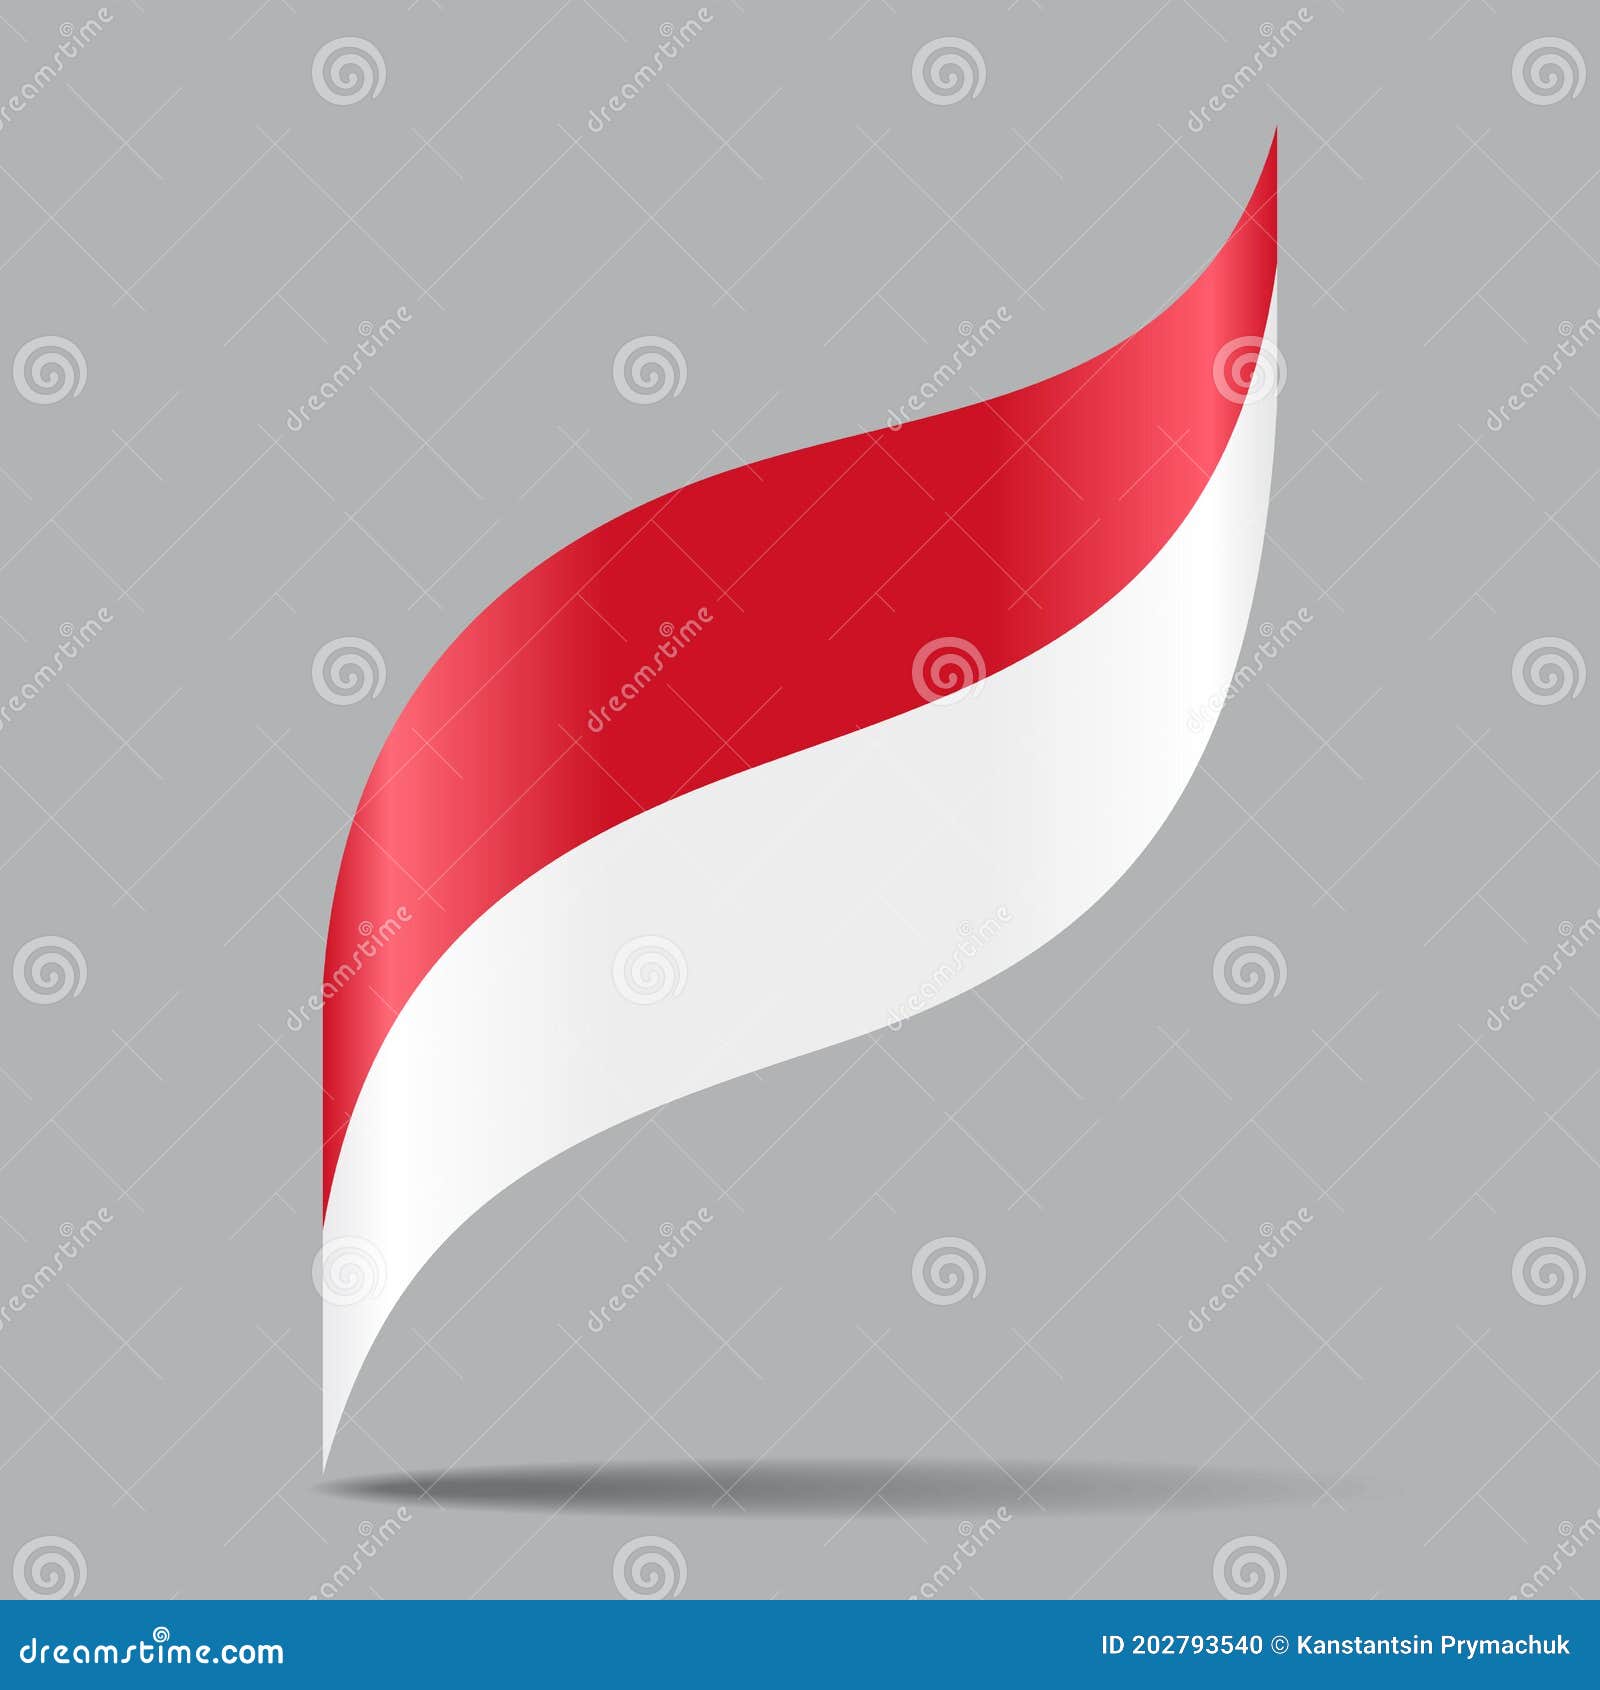 Indonesian Flag Wavy Abstract Background. Vector Illustration Stock ...